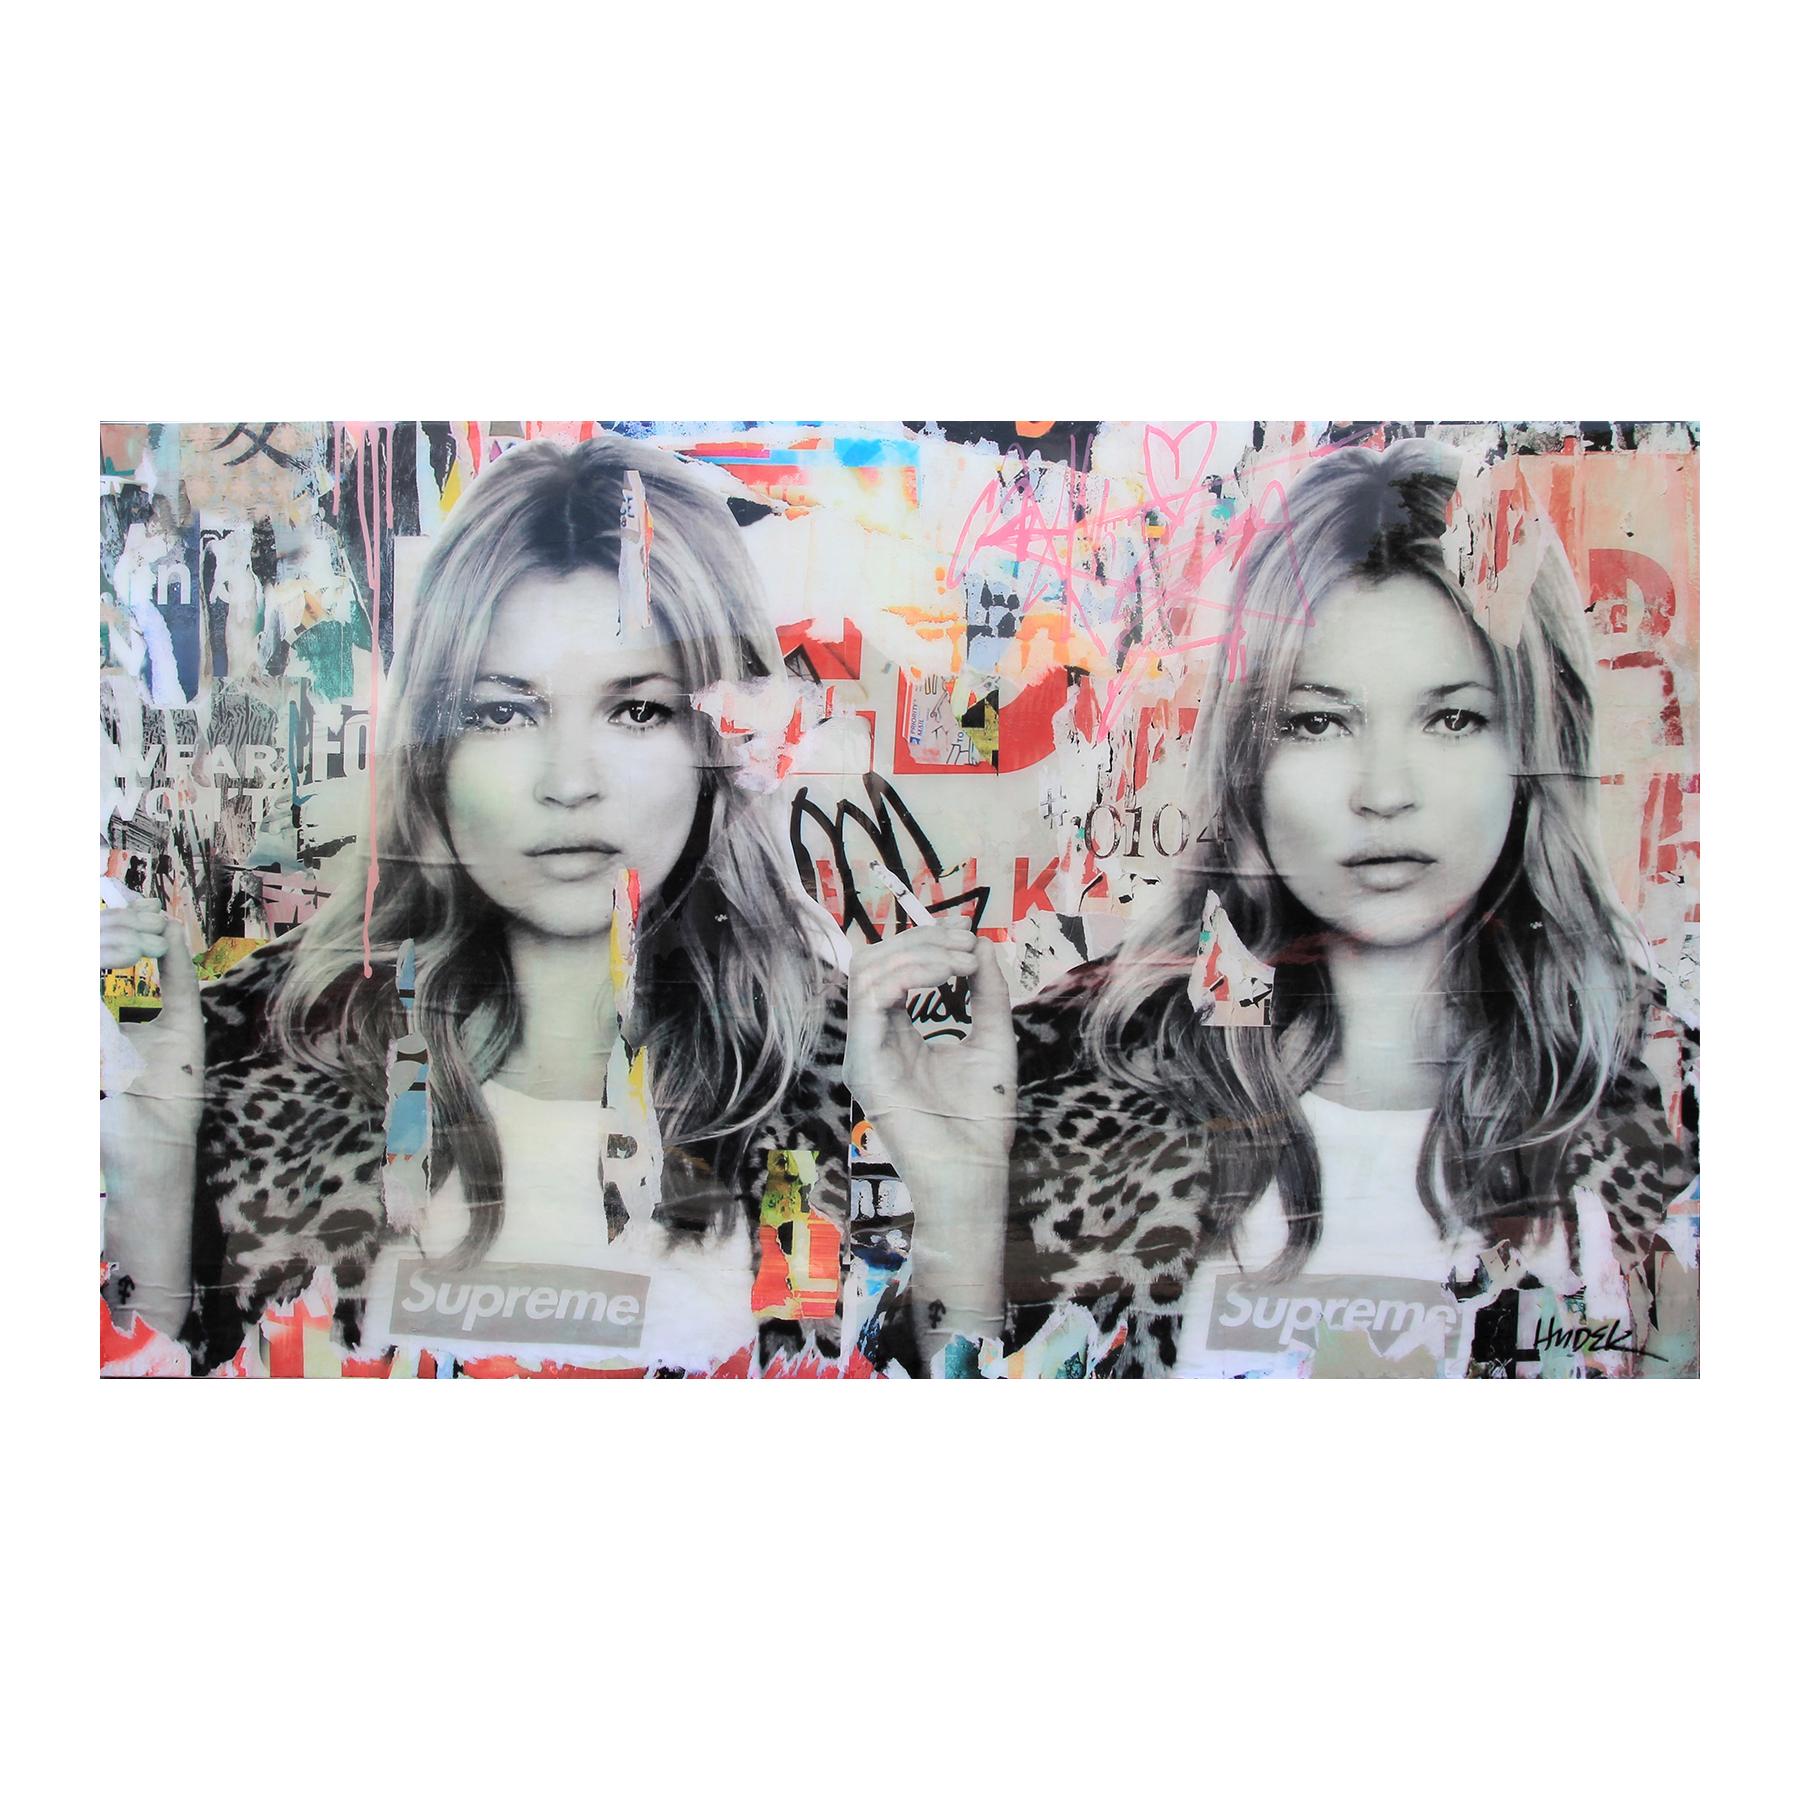 Jim Hudek Portrait Painting - “Pair of Kates” Colorful Contemporary Mixed Media Pop Art Collage of Kate Moss